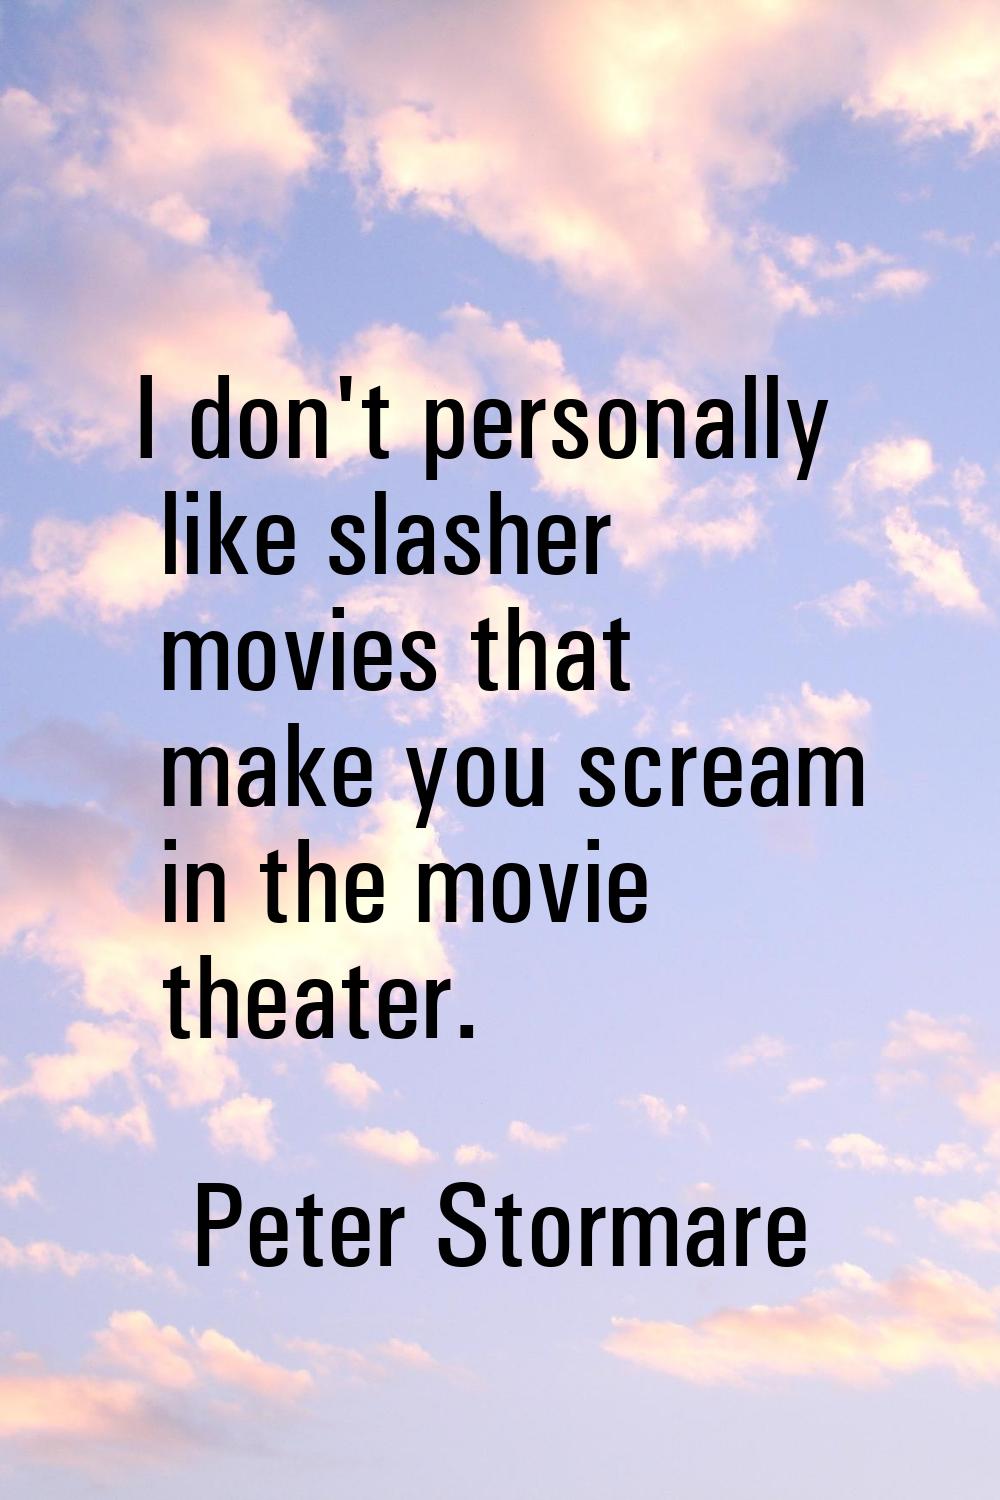 I don't personally like slasher movies that make you scream in the movie theater.